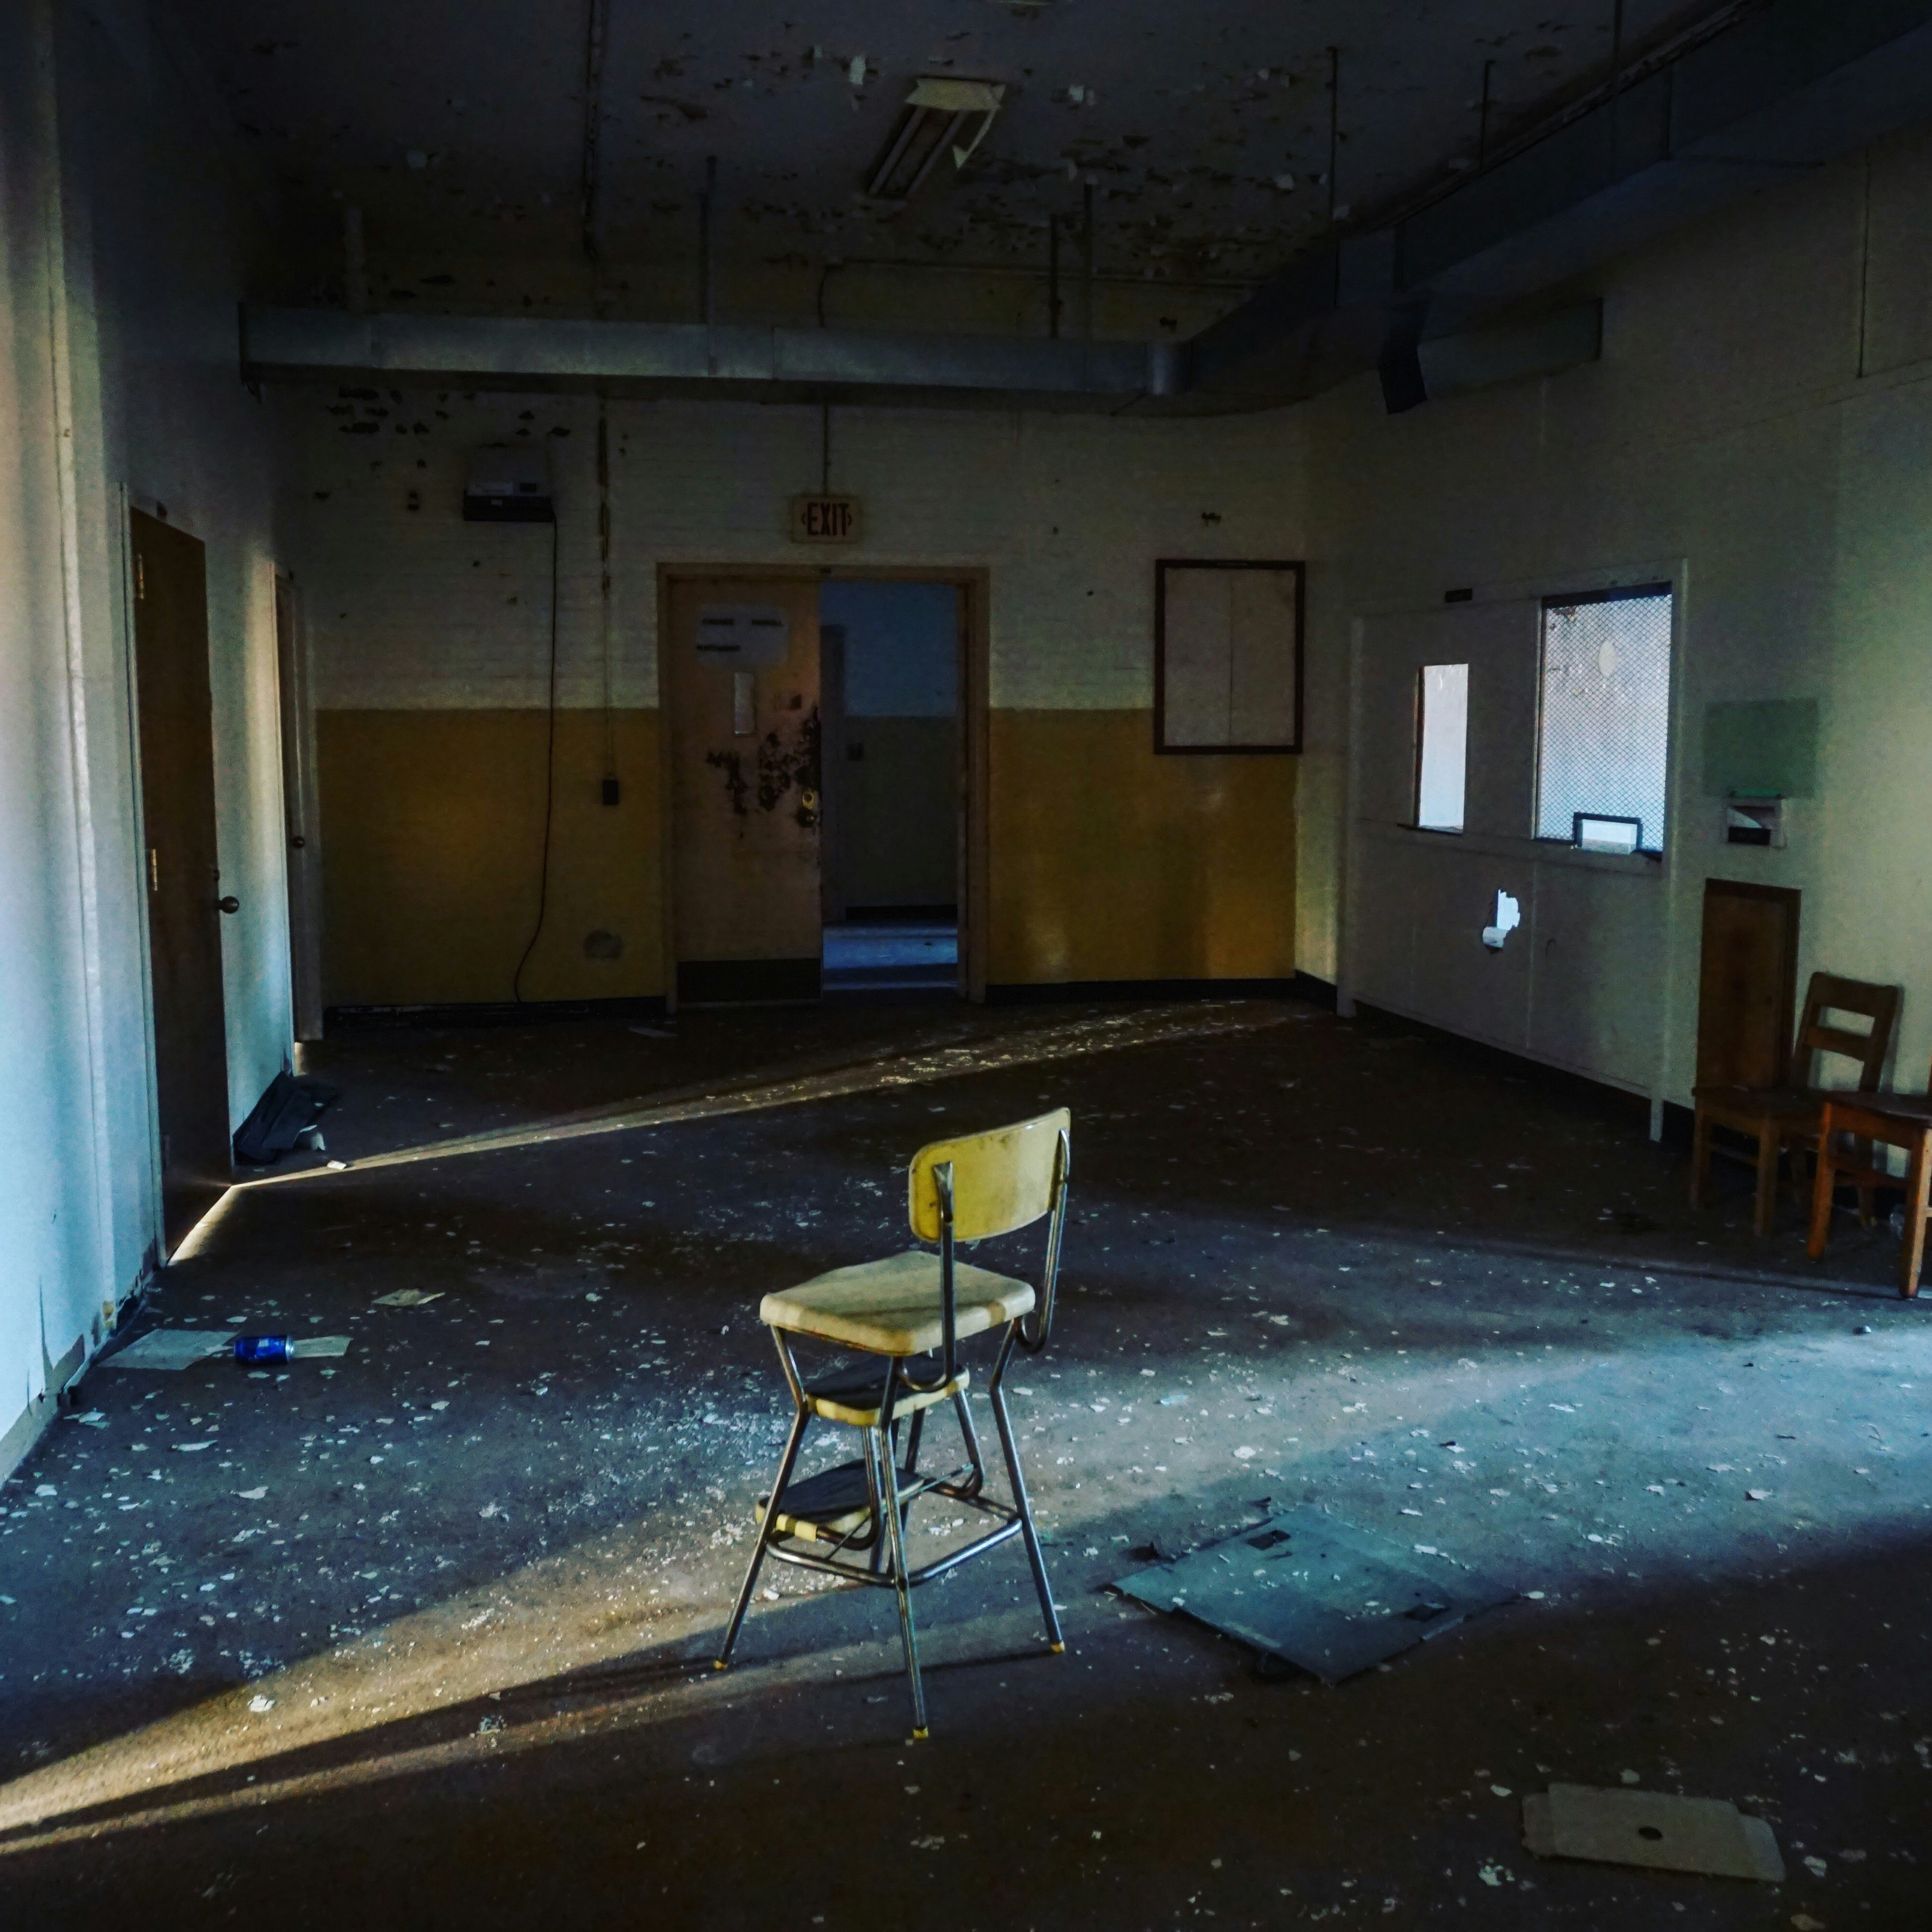 Abandoned School with Chair Sitting Empty in Middle of The Room